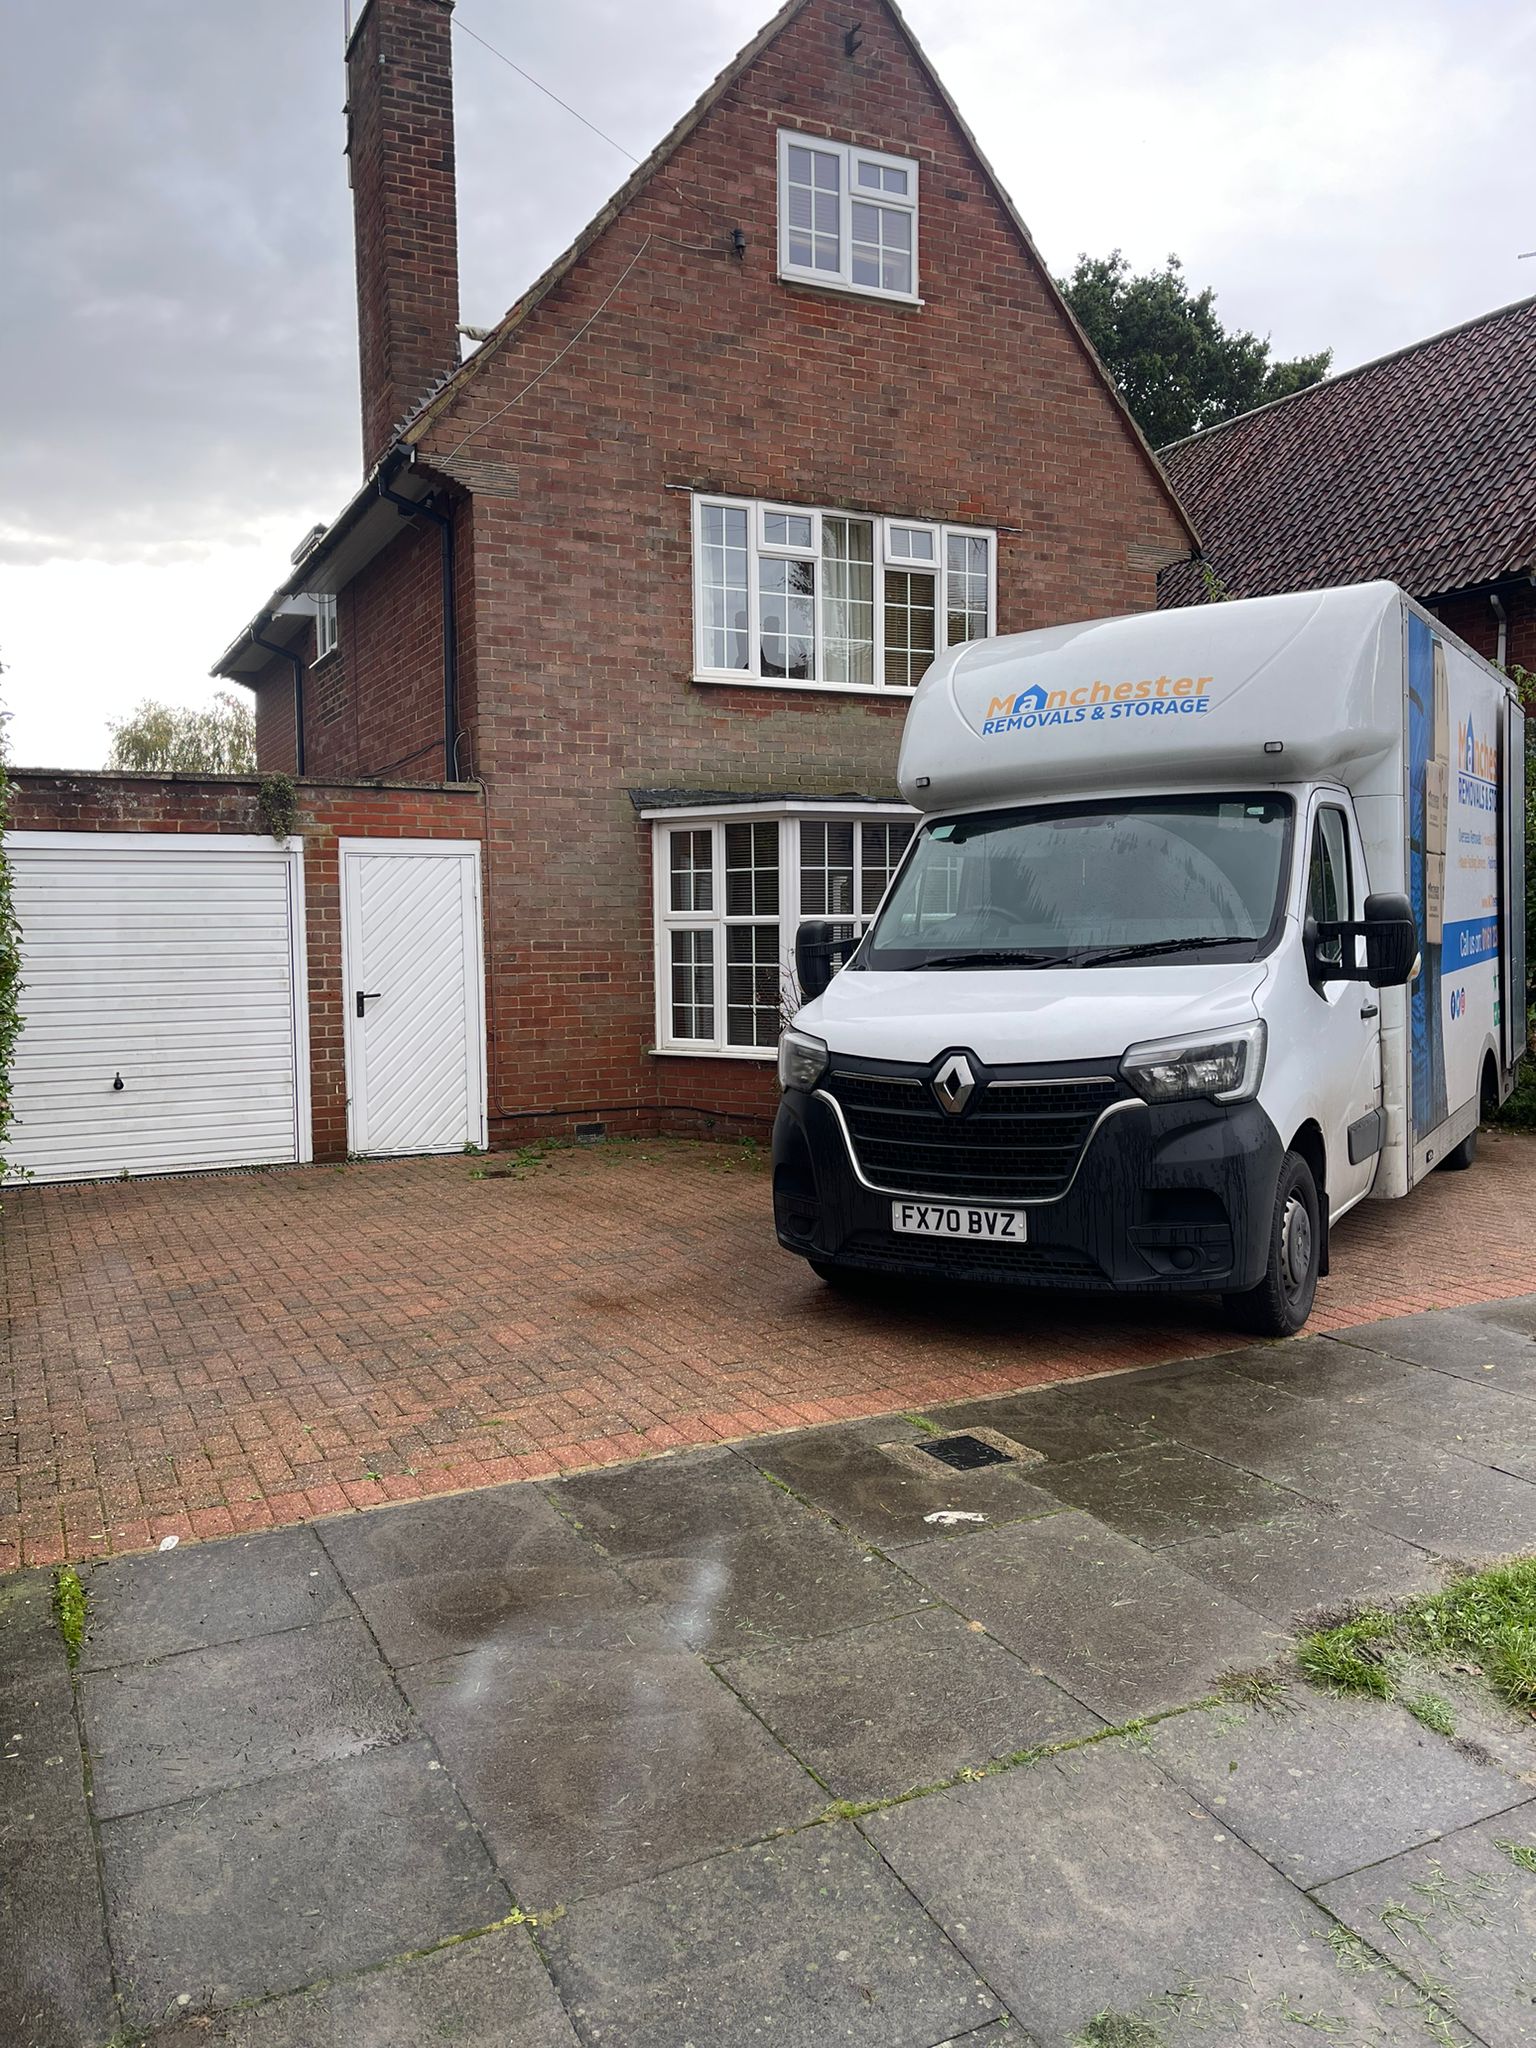 Removals Vehicle Outside House in Chorlton - Manchester Removals & Storage - Manchester Removals & Storage